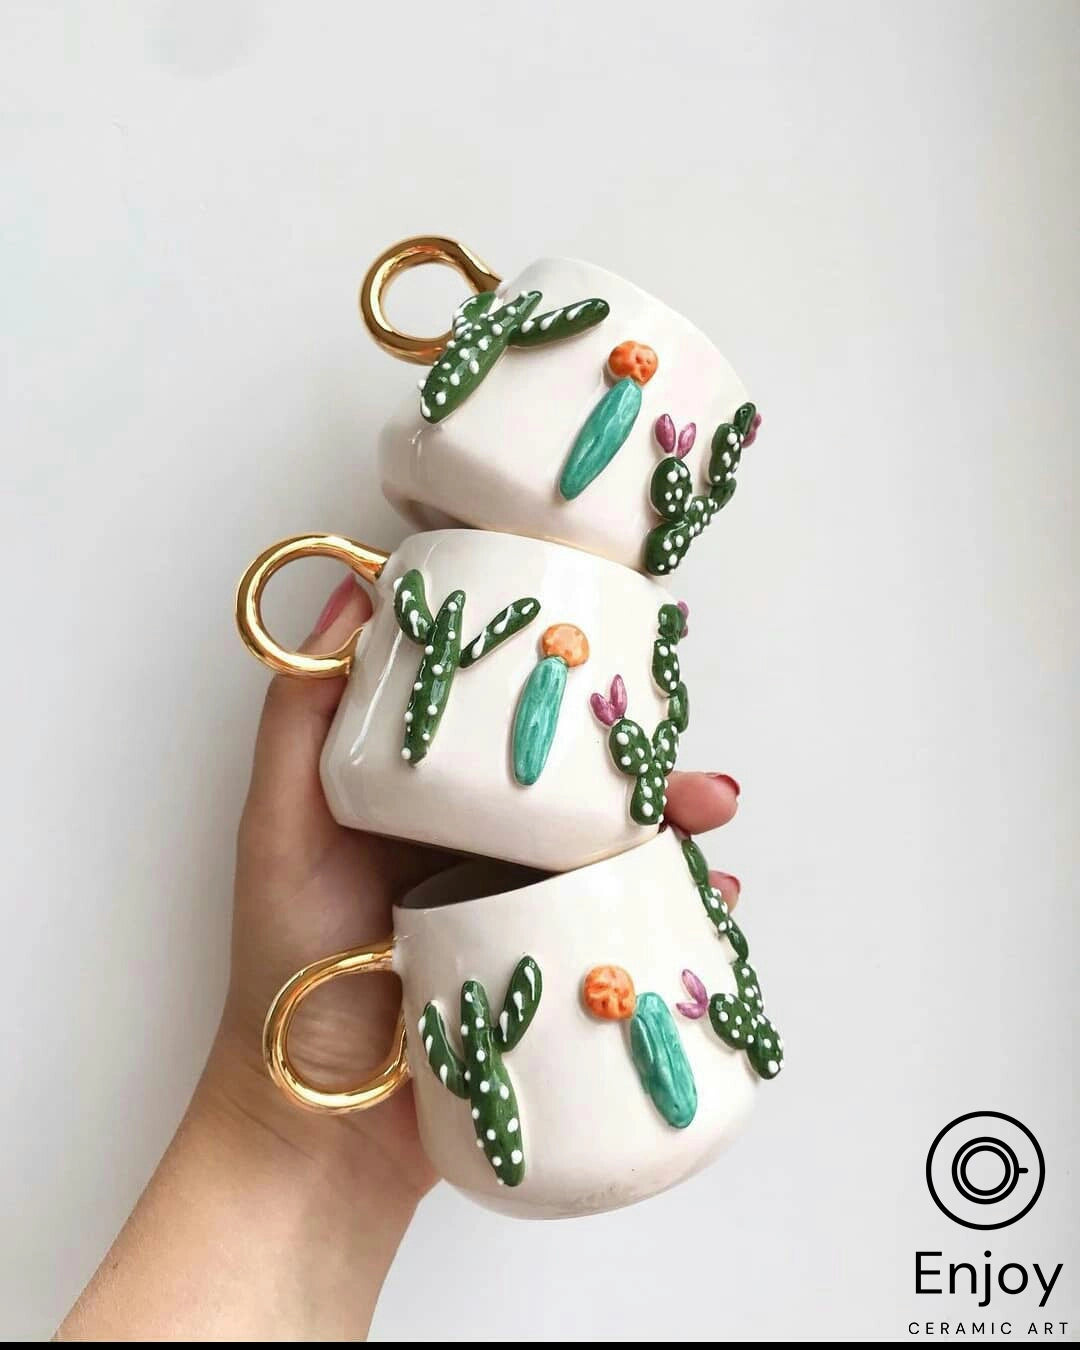 Hand holding three stacked white mugs with cactus designs and gold handles against a plain background.